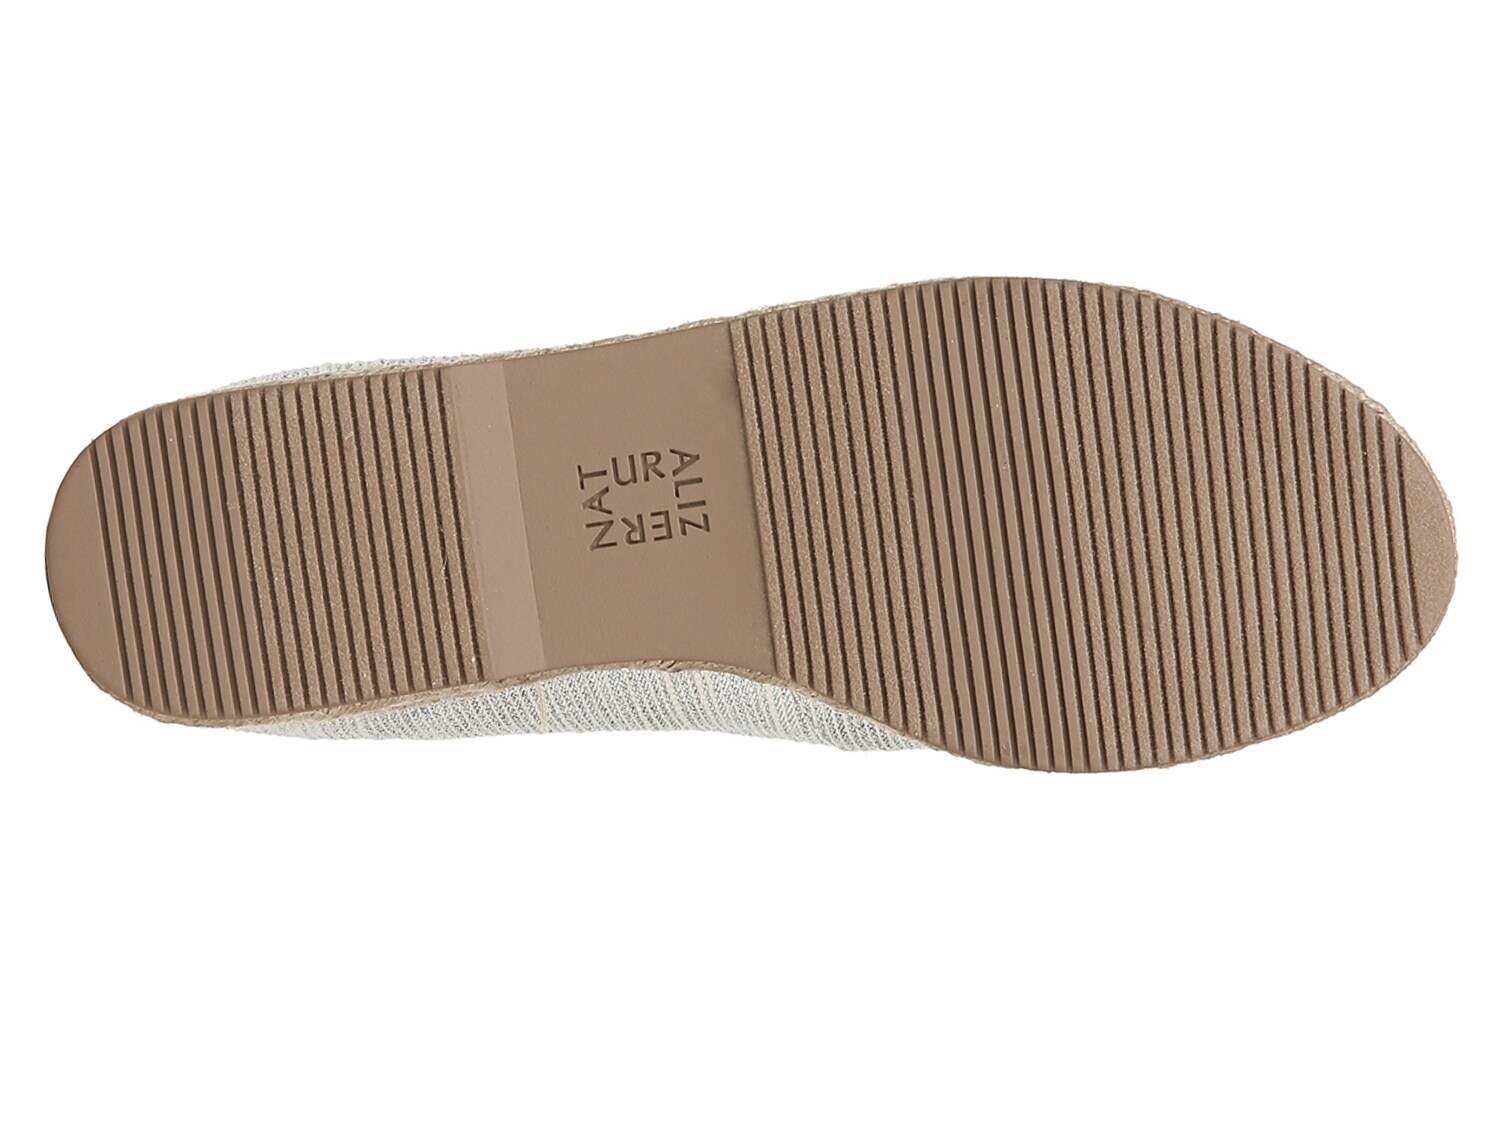 naturalizer whitley espadrille